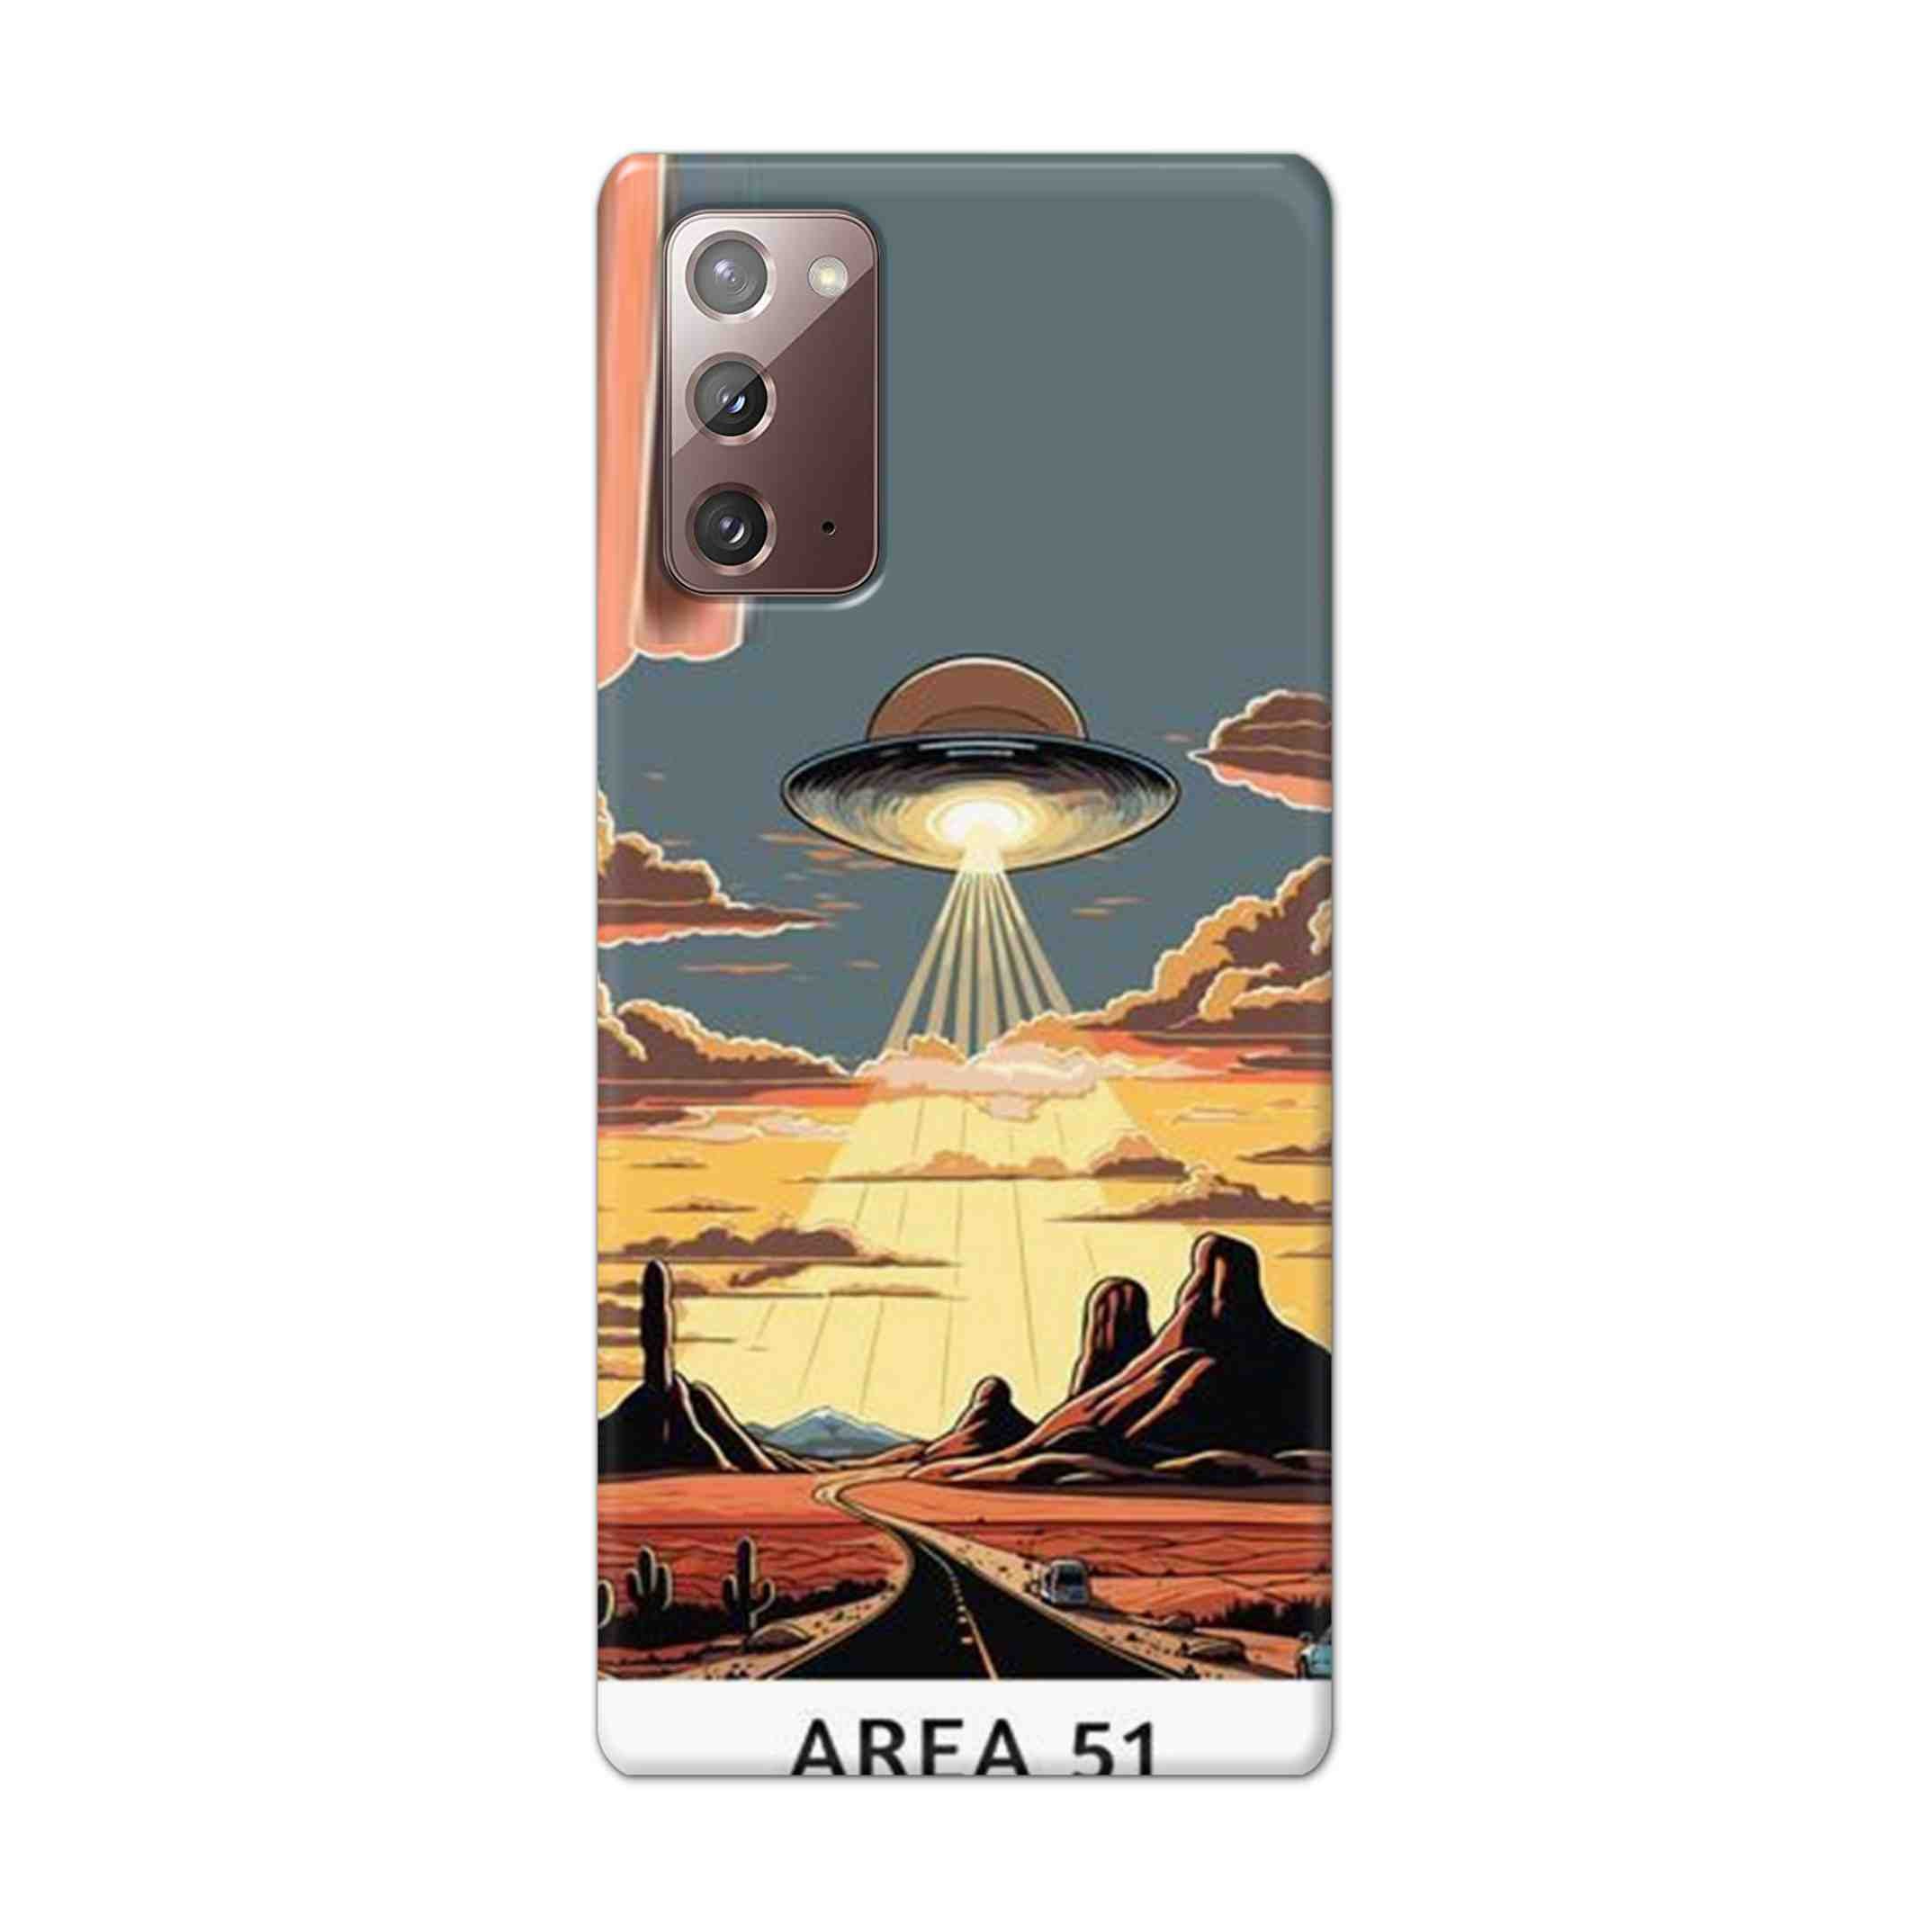 Buy Area 51 Hard Back Mobile Phone Case Cover For Samsung Galaxy Note 20 Online